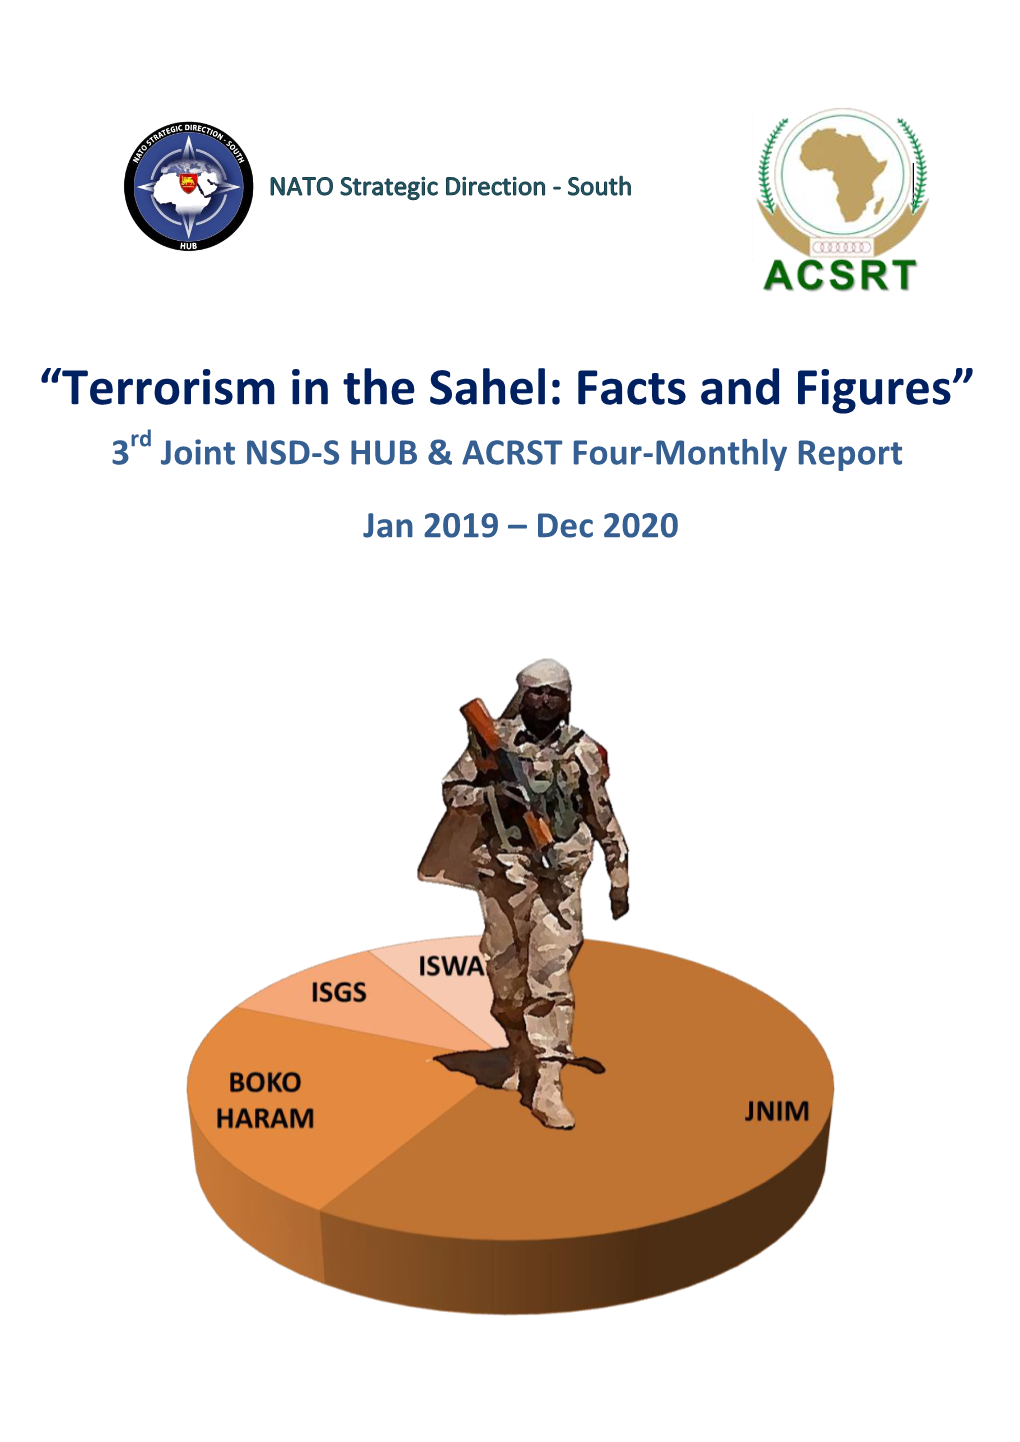 “Terrorism in the Sahel: Facts and Figures” 3Rd Joint NSD-S HUB & ACRST Four-Monthly Report